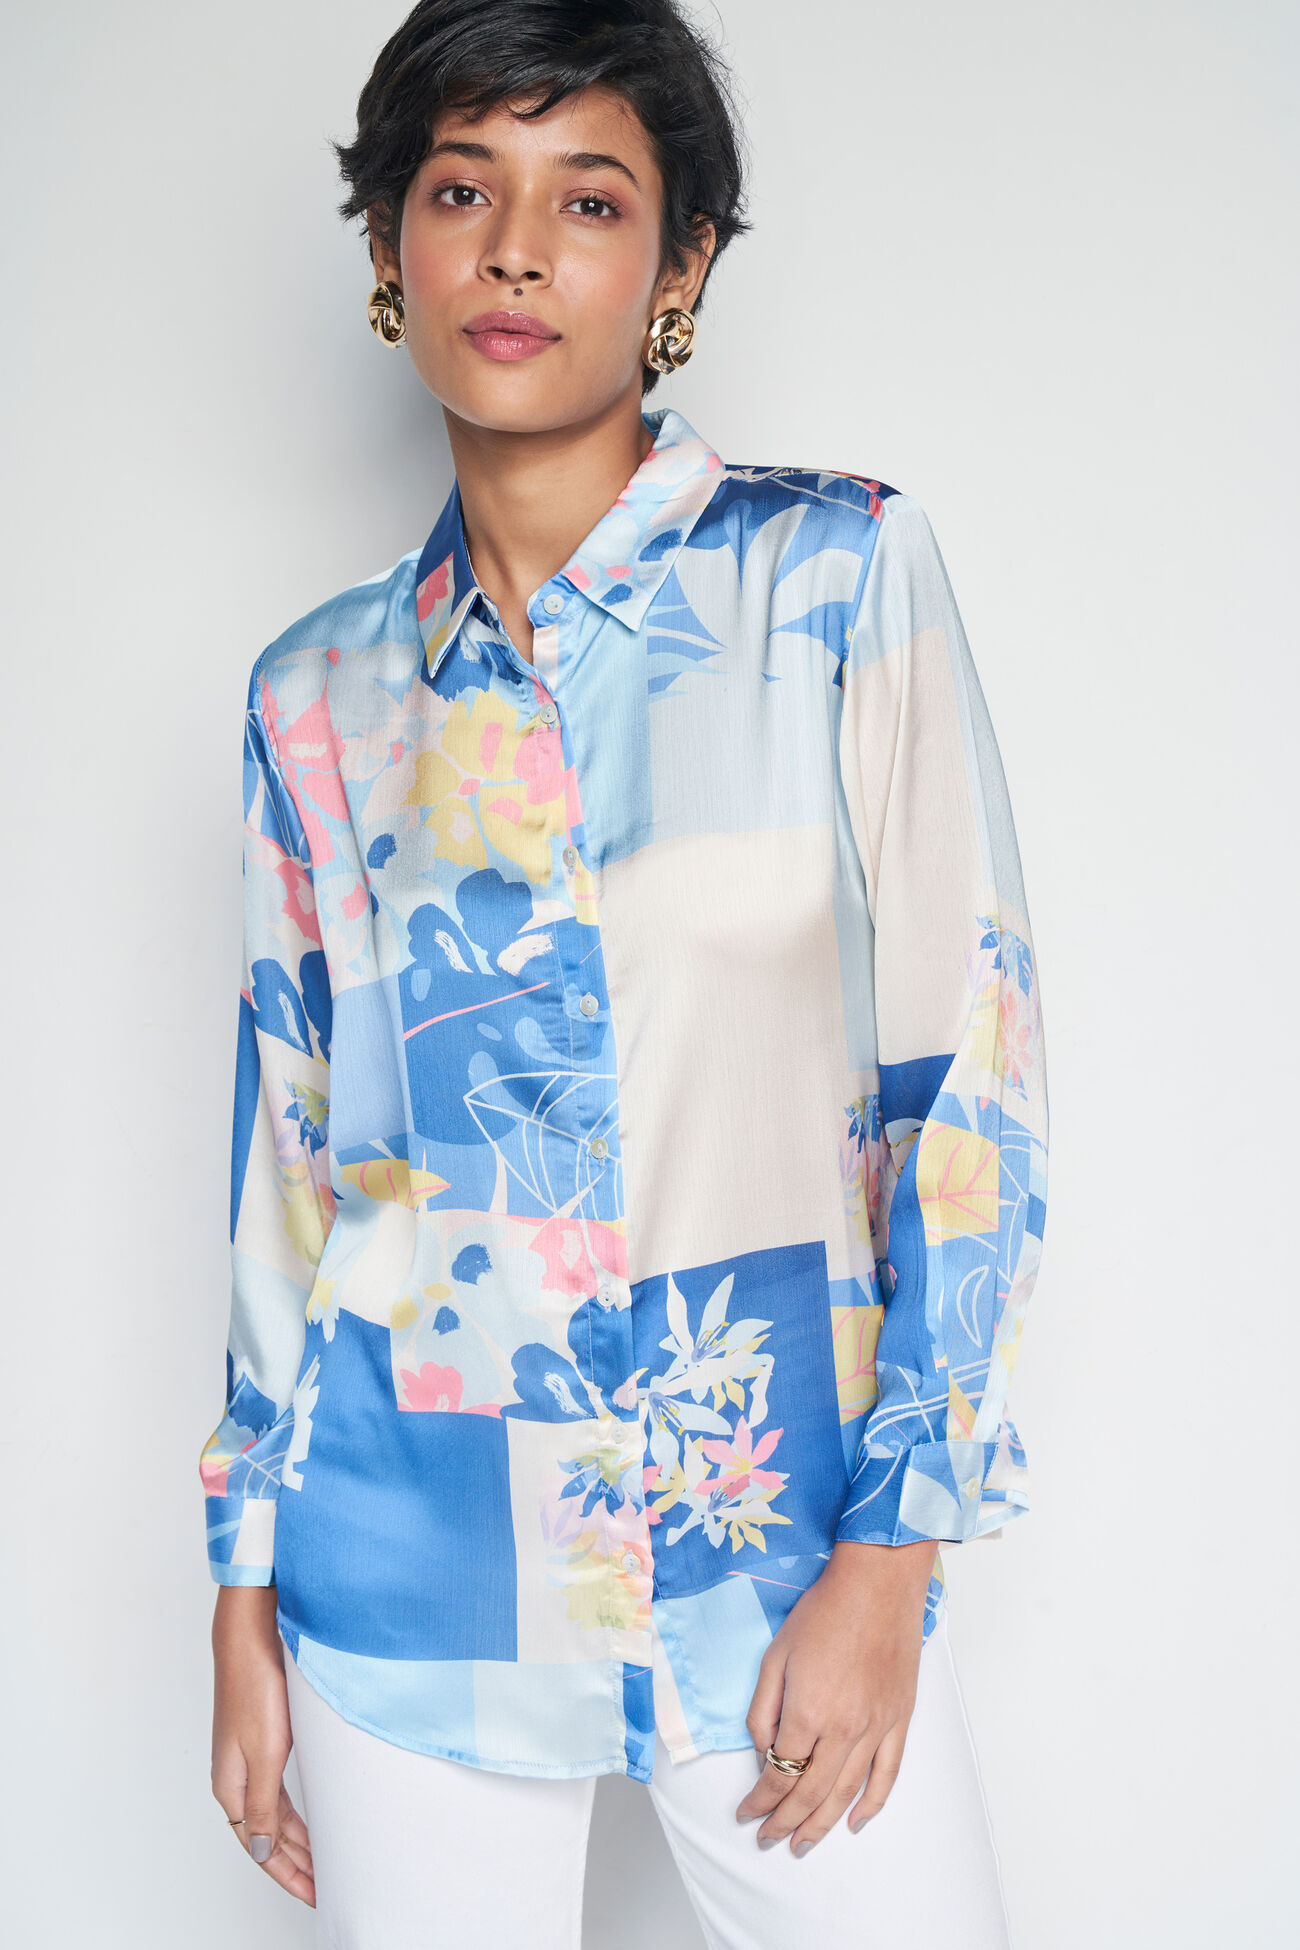 Buy our Blu Prt Top online from ANDIndia SC- F23AJ061TV66